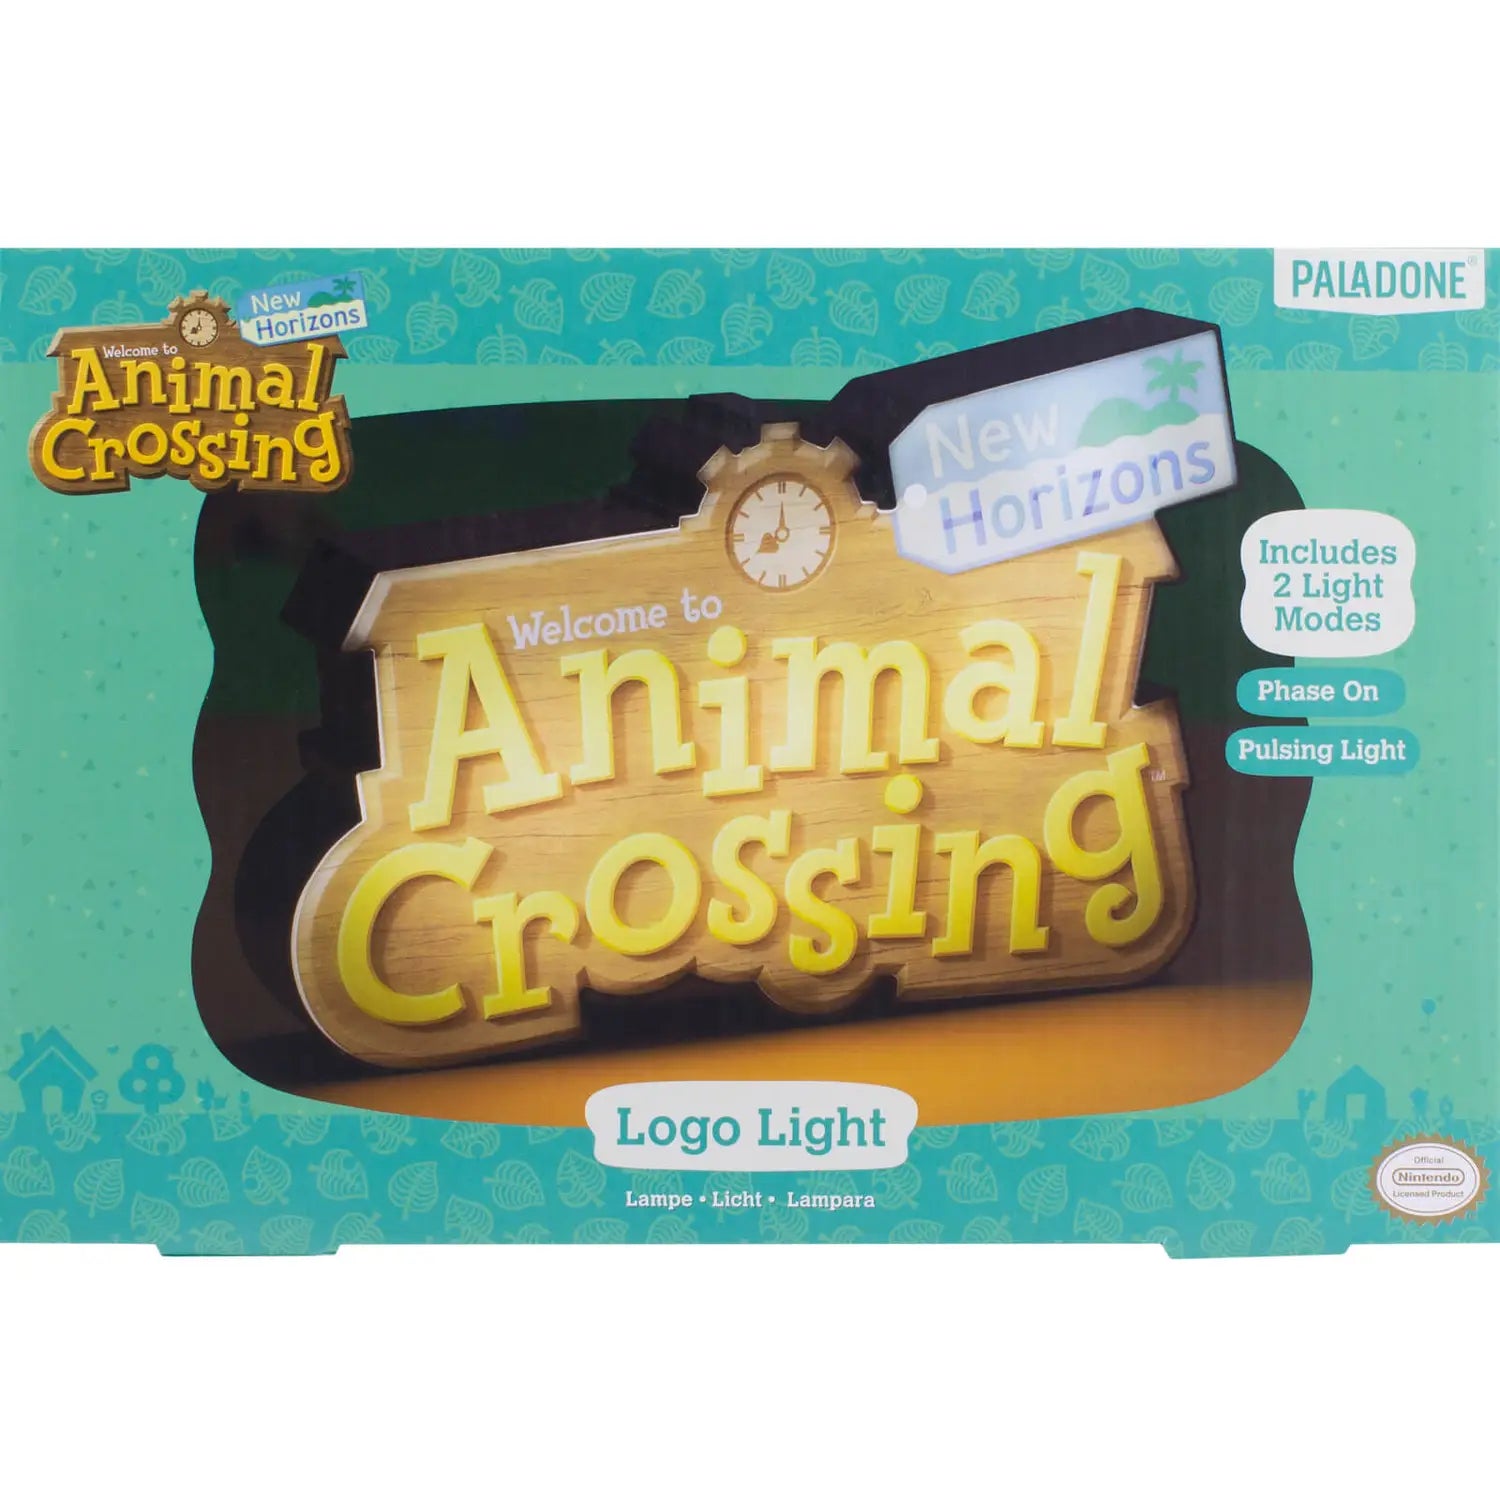 Illuminate your space with the delightful Paladone Animal Crossing Logo Light, featuring the recognizable emblem from the popular Nintendo game. This charming light adds a cozy, inviting warm glow to any room, making it an ideal addition for Animal Crossing players and collectors. Bring the serene world of Animal Crossing to your home with this calming and gaming-inspired decor.